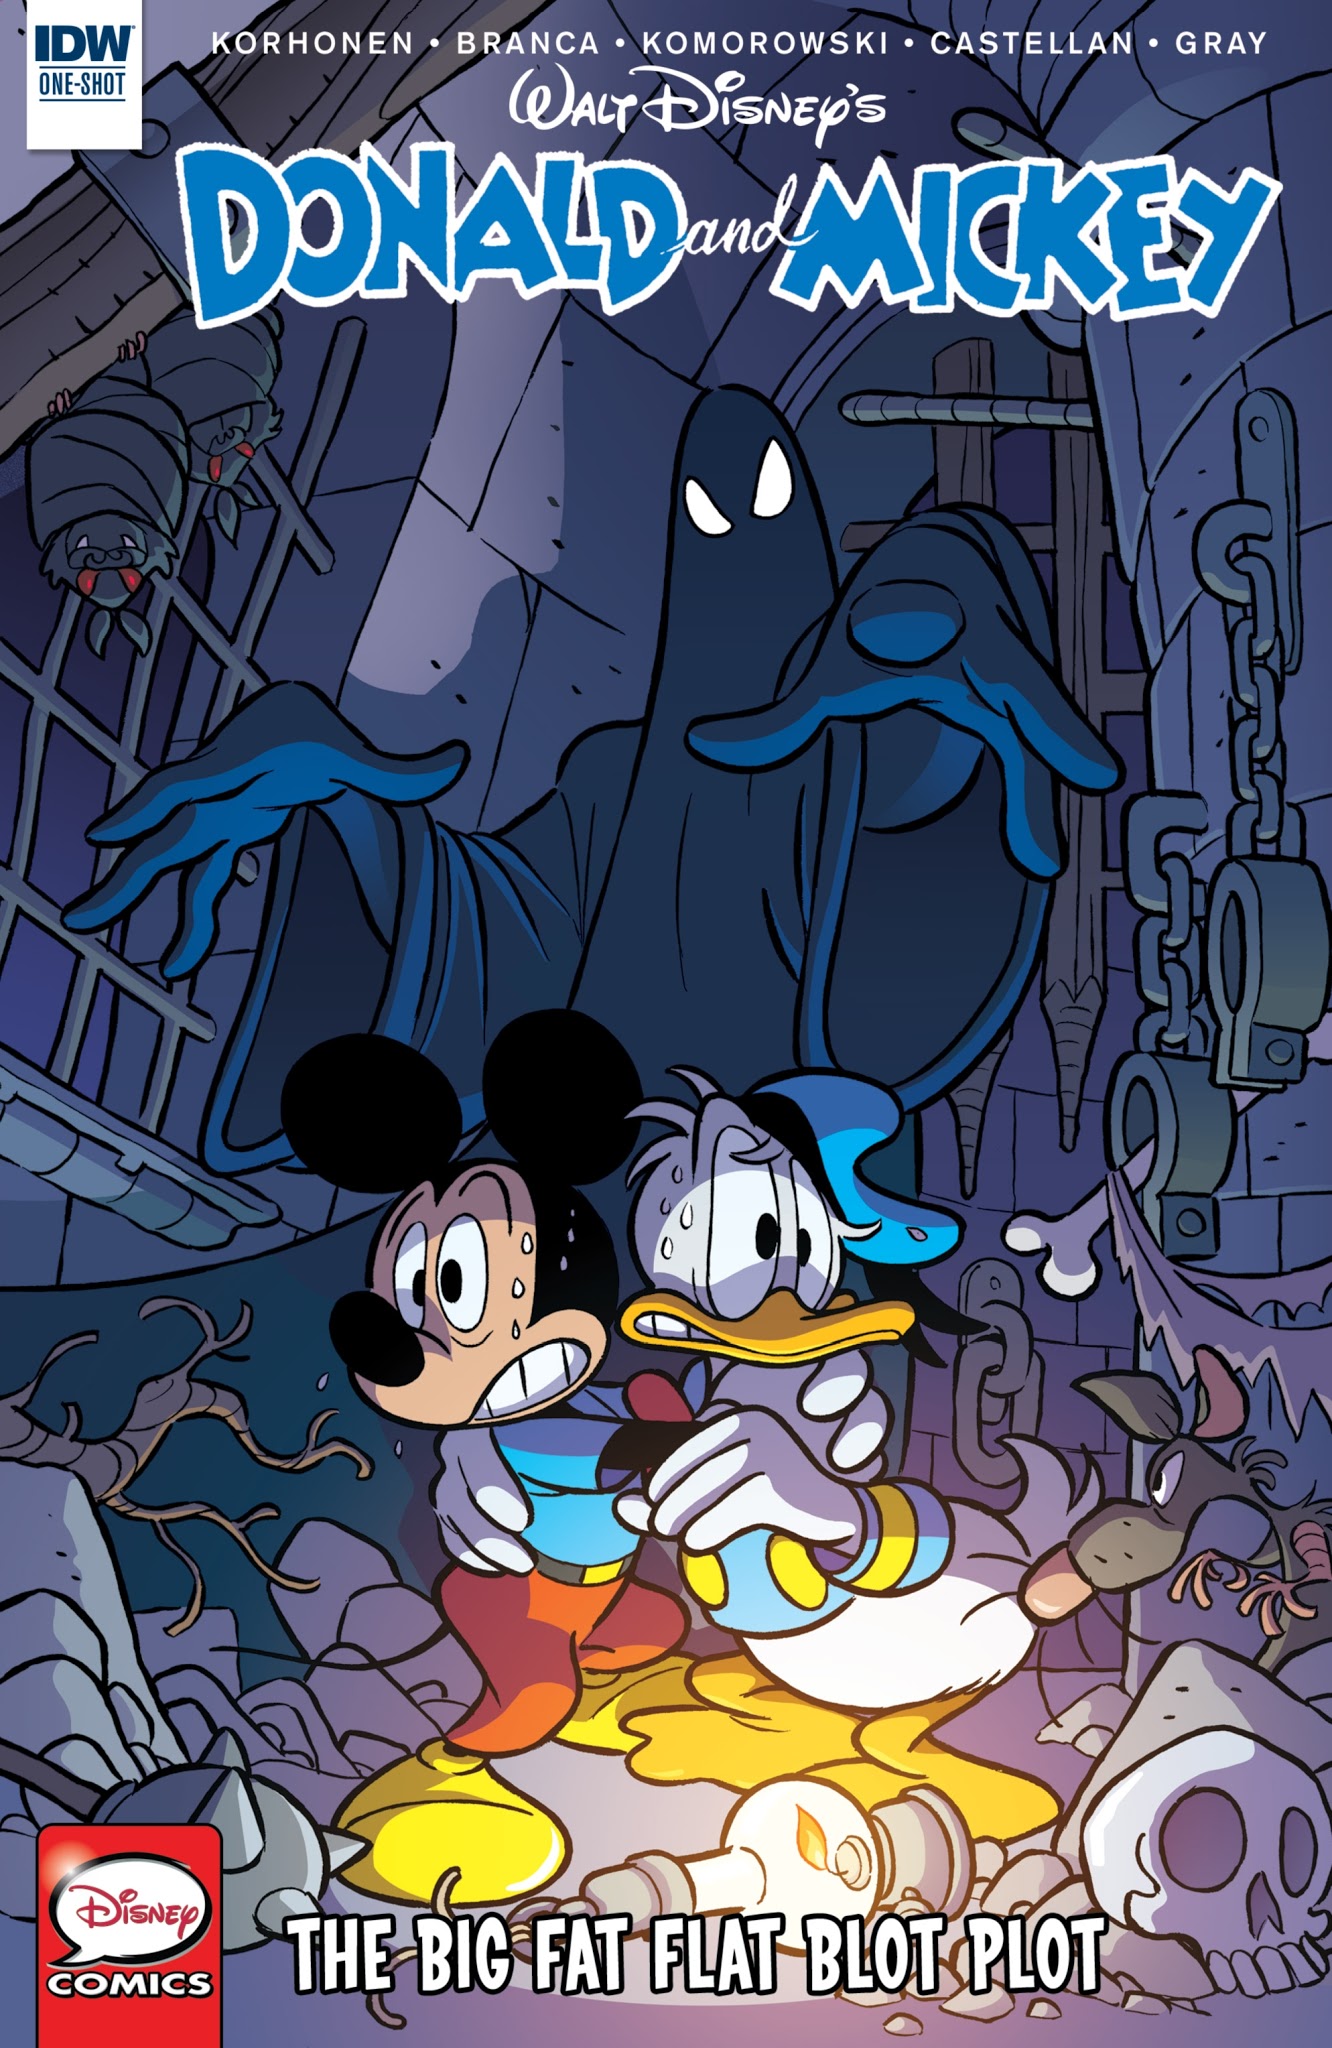 Read online Donald and Mickey comic -  Issue #1 - 1